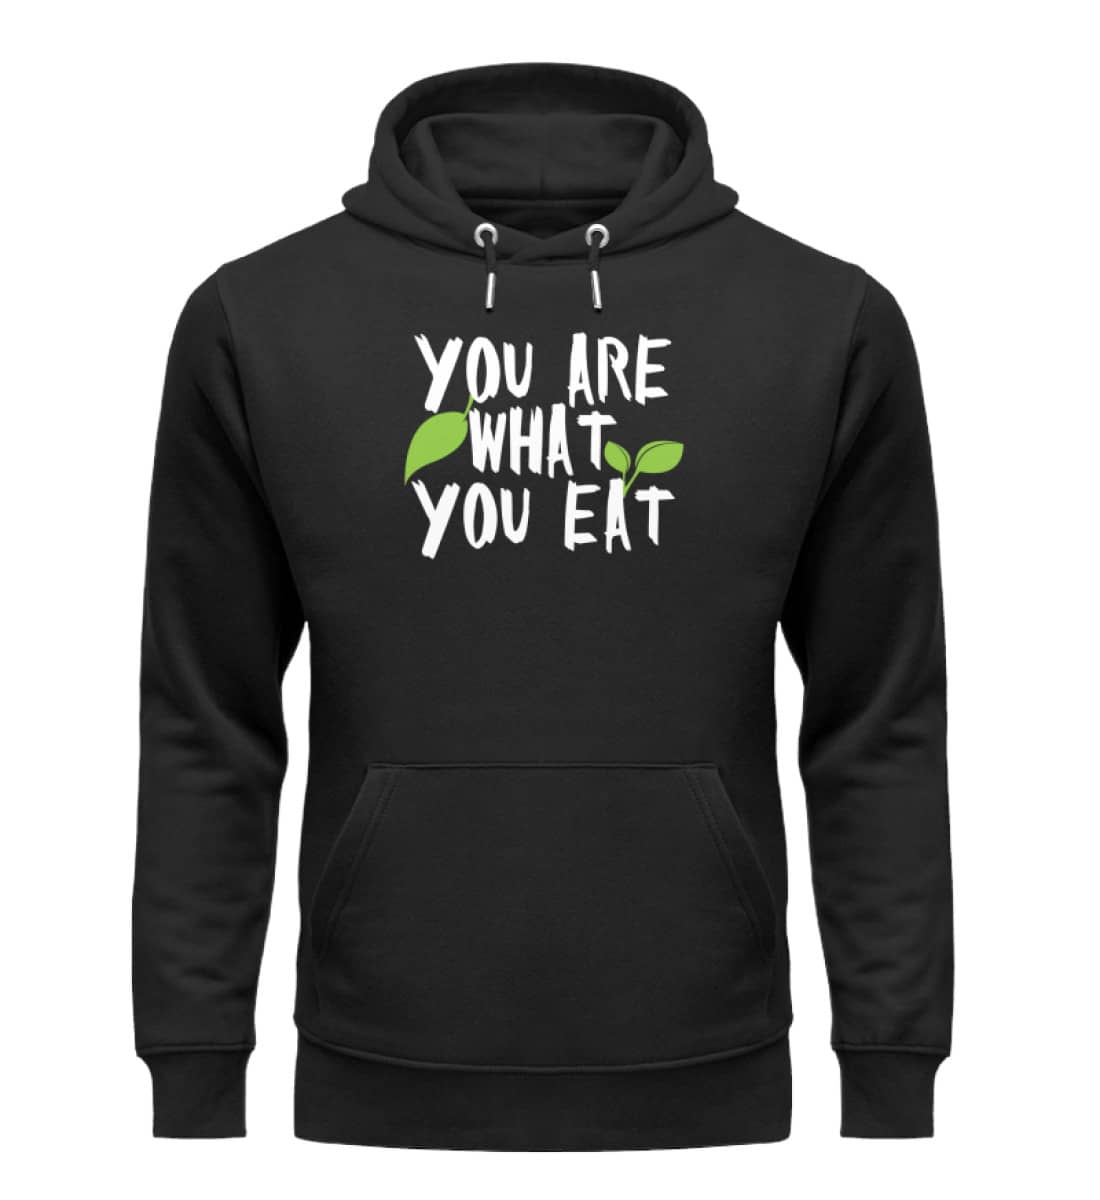 You Are What You Eat - Unisex Organic Hoodie-16